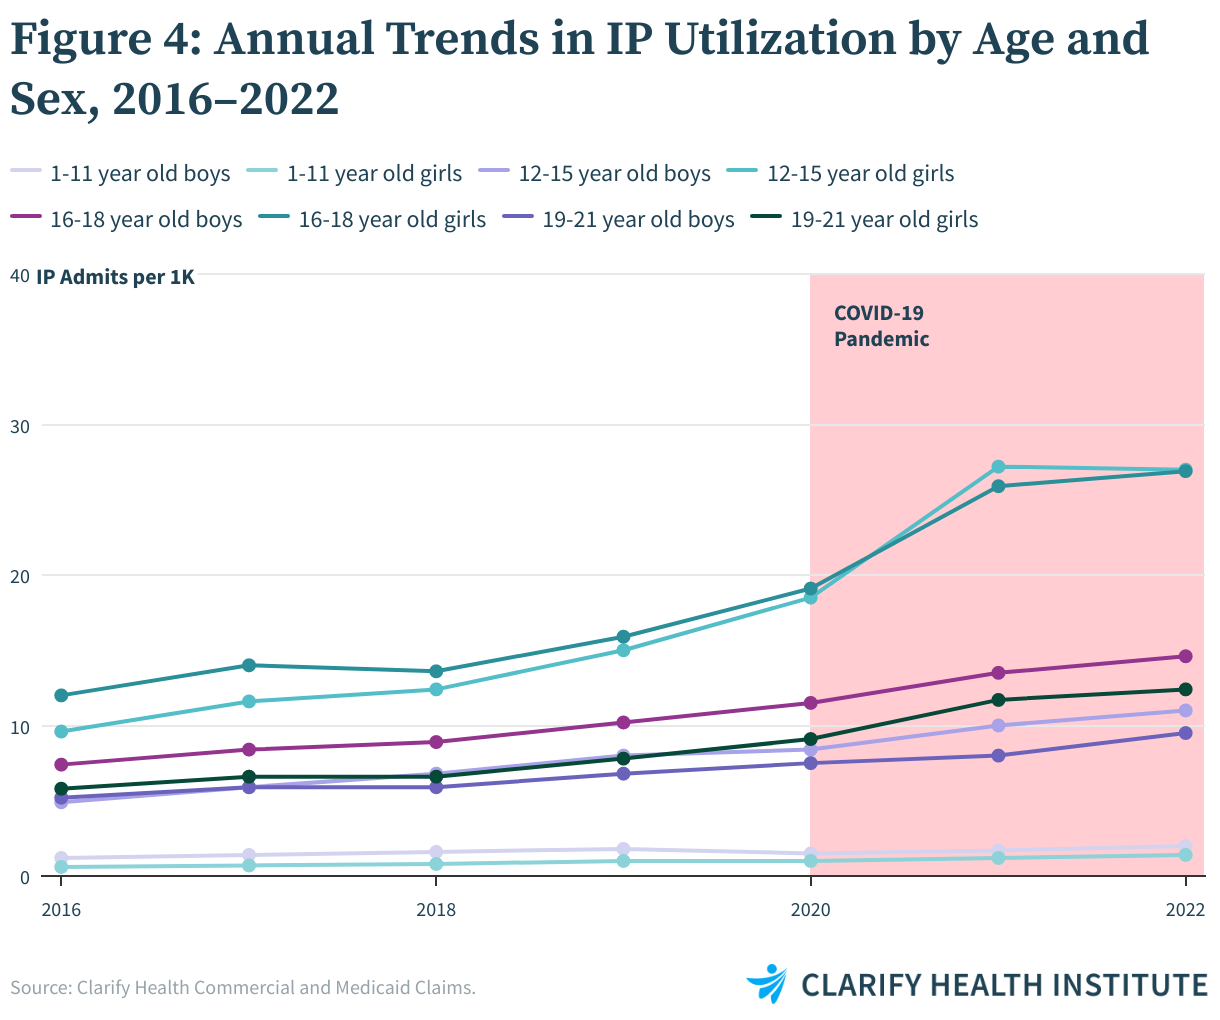 FIGURE 4: ANNUAL TRENDS IN IP UTILIZATION BY AGE AND SEX, 2016–2022